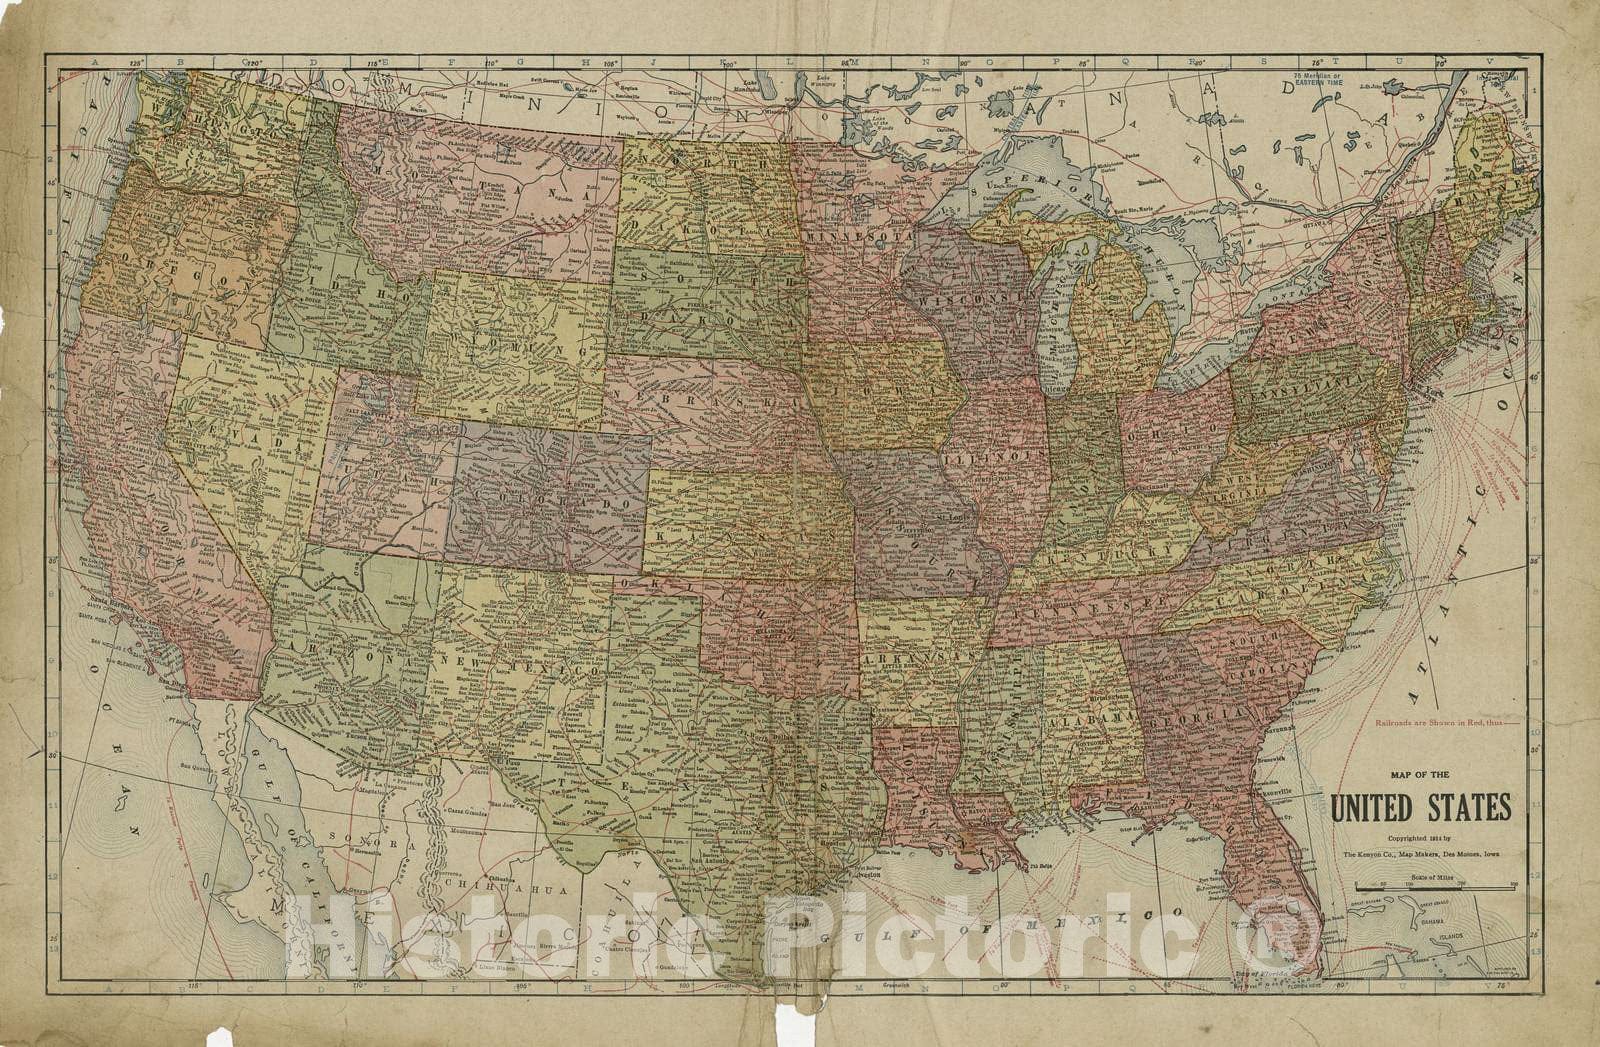 Historic 1915 Map - Atlas and plat Book of Holt County, Nebraska - Map of The United States - Standard Atlas and Directory of Holt County, Nebraska